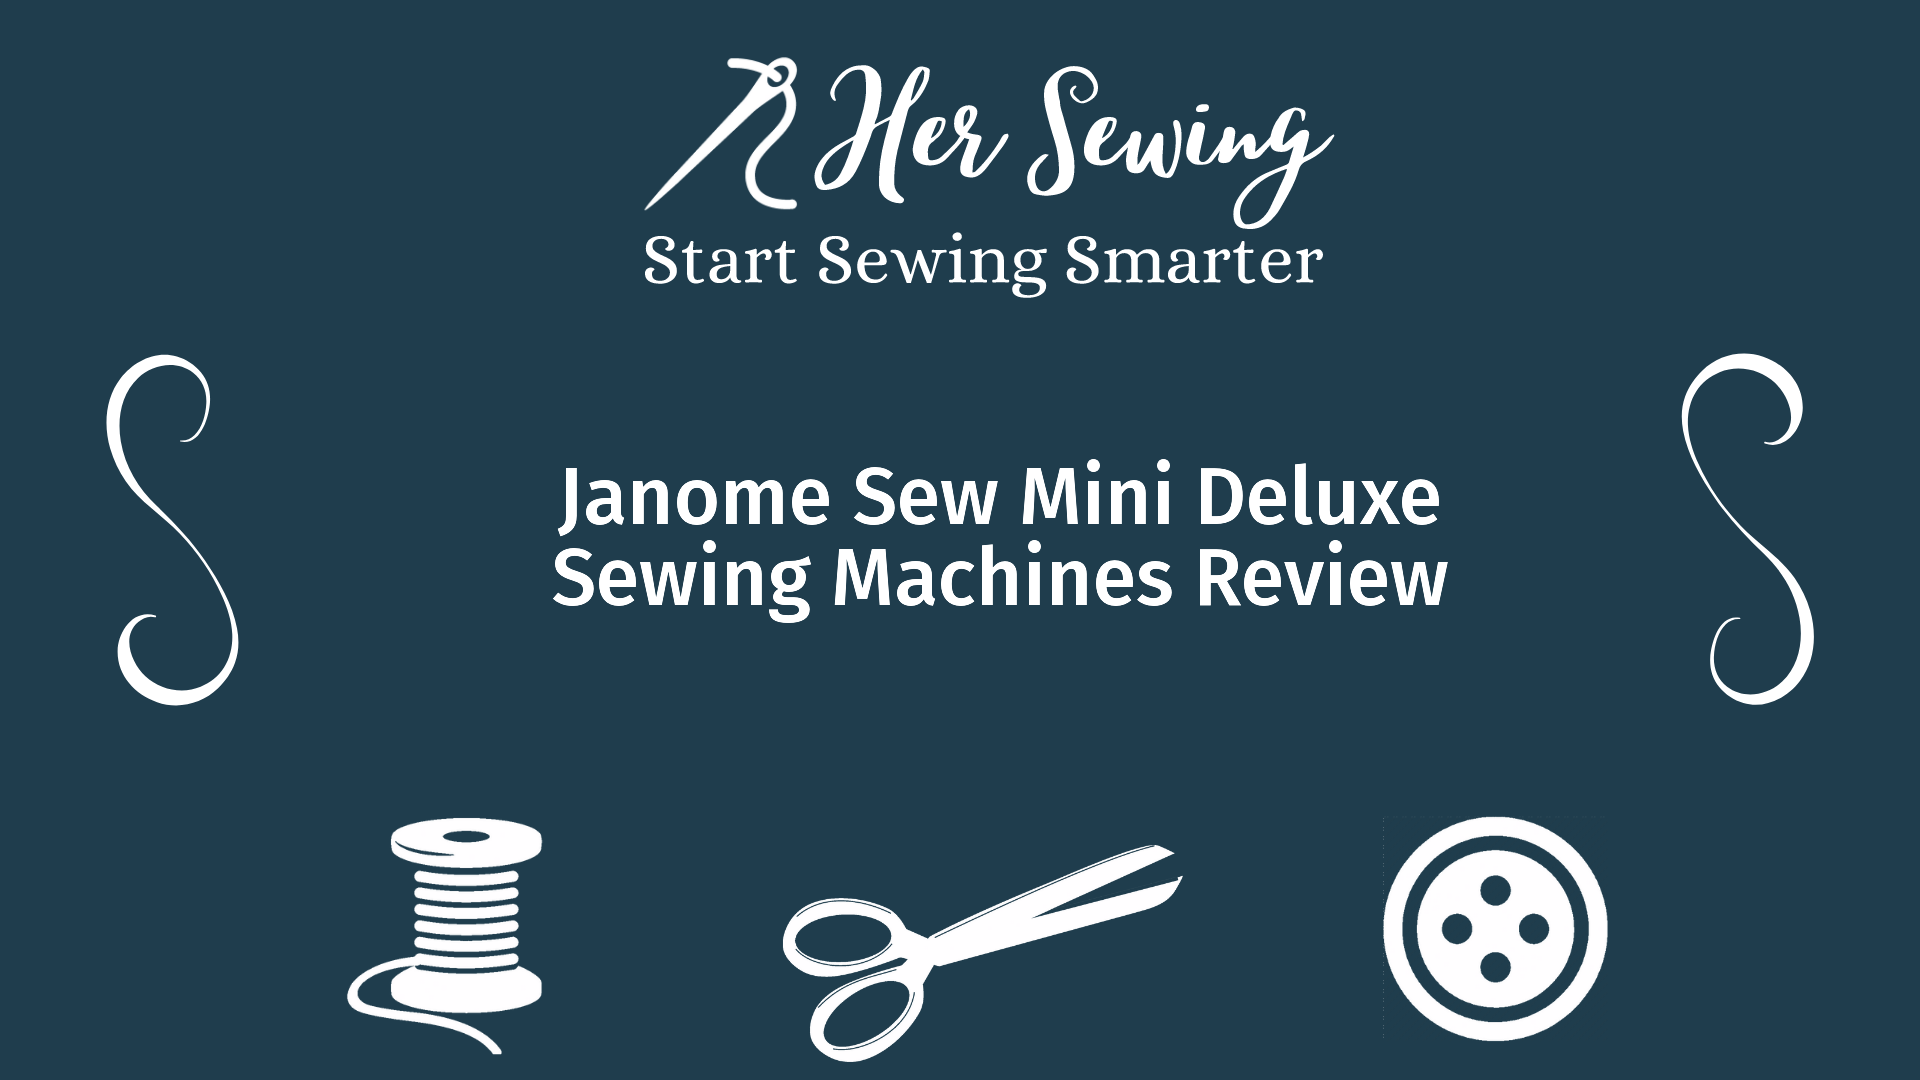 Janome Sew Mini Deluxe Sewing Machines Review - Her Sewing